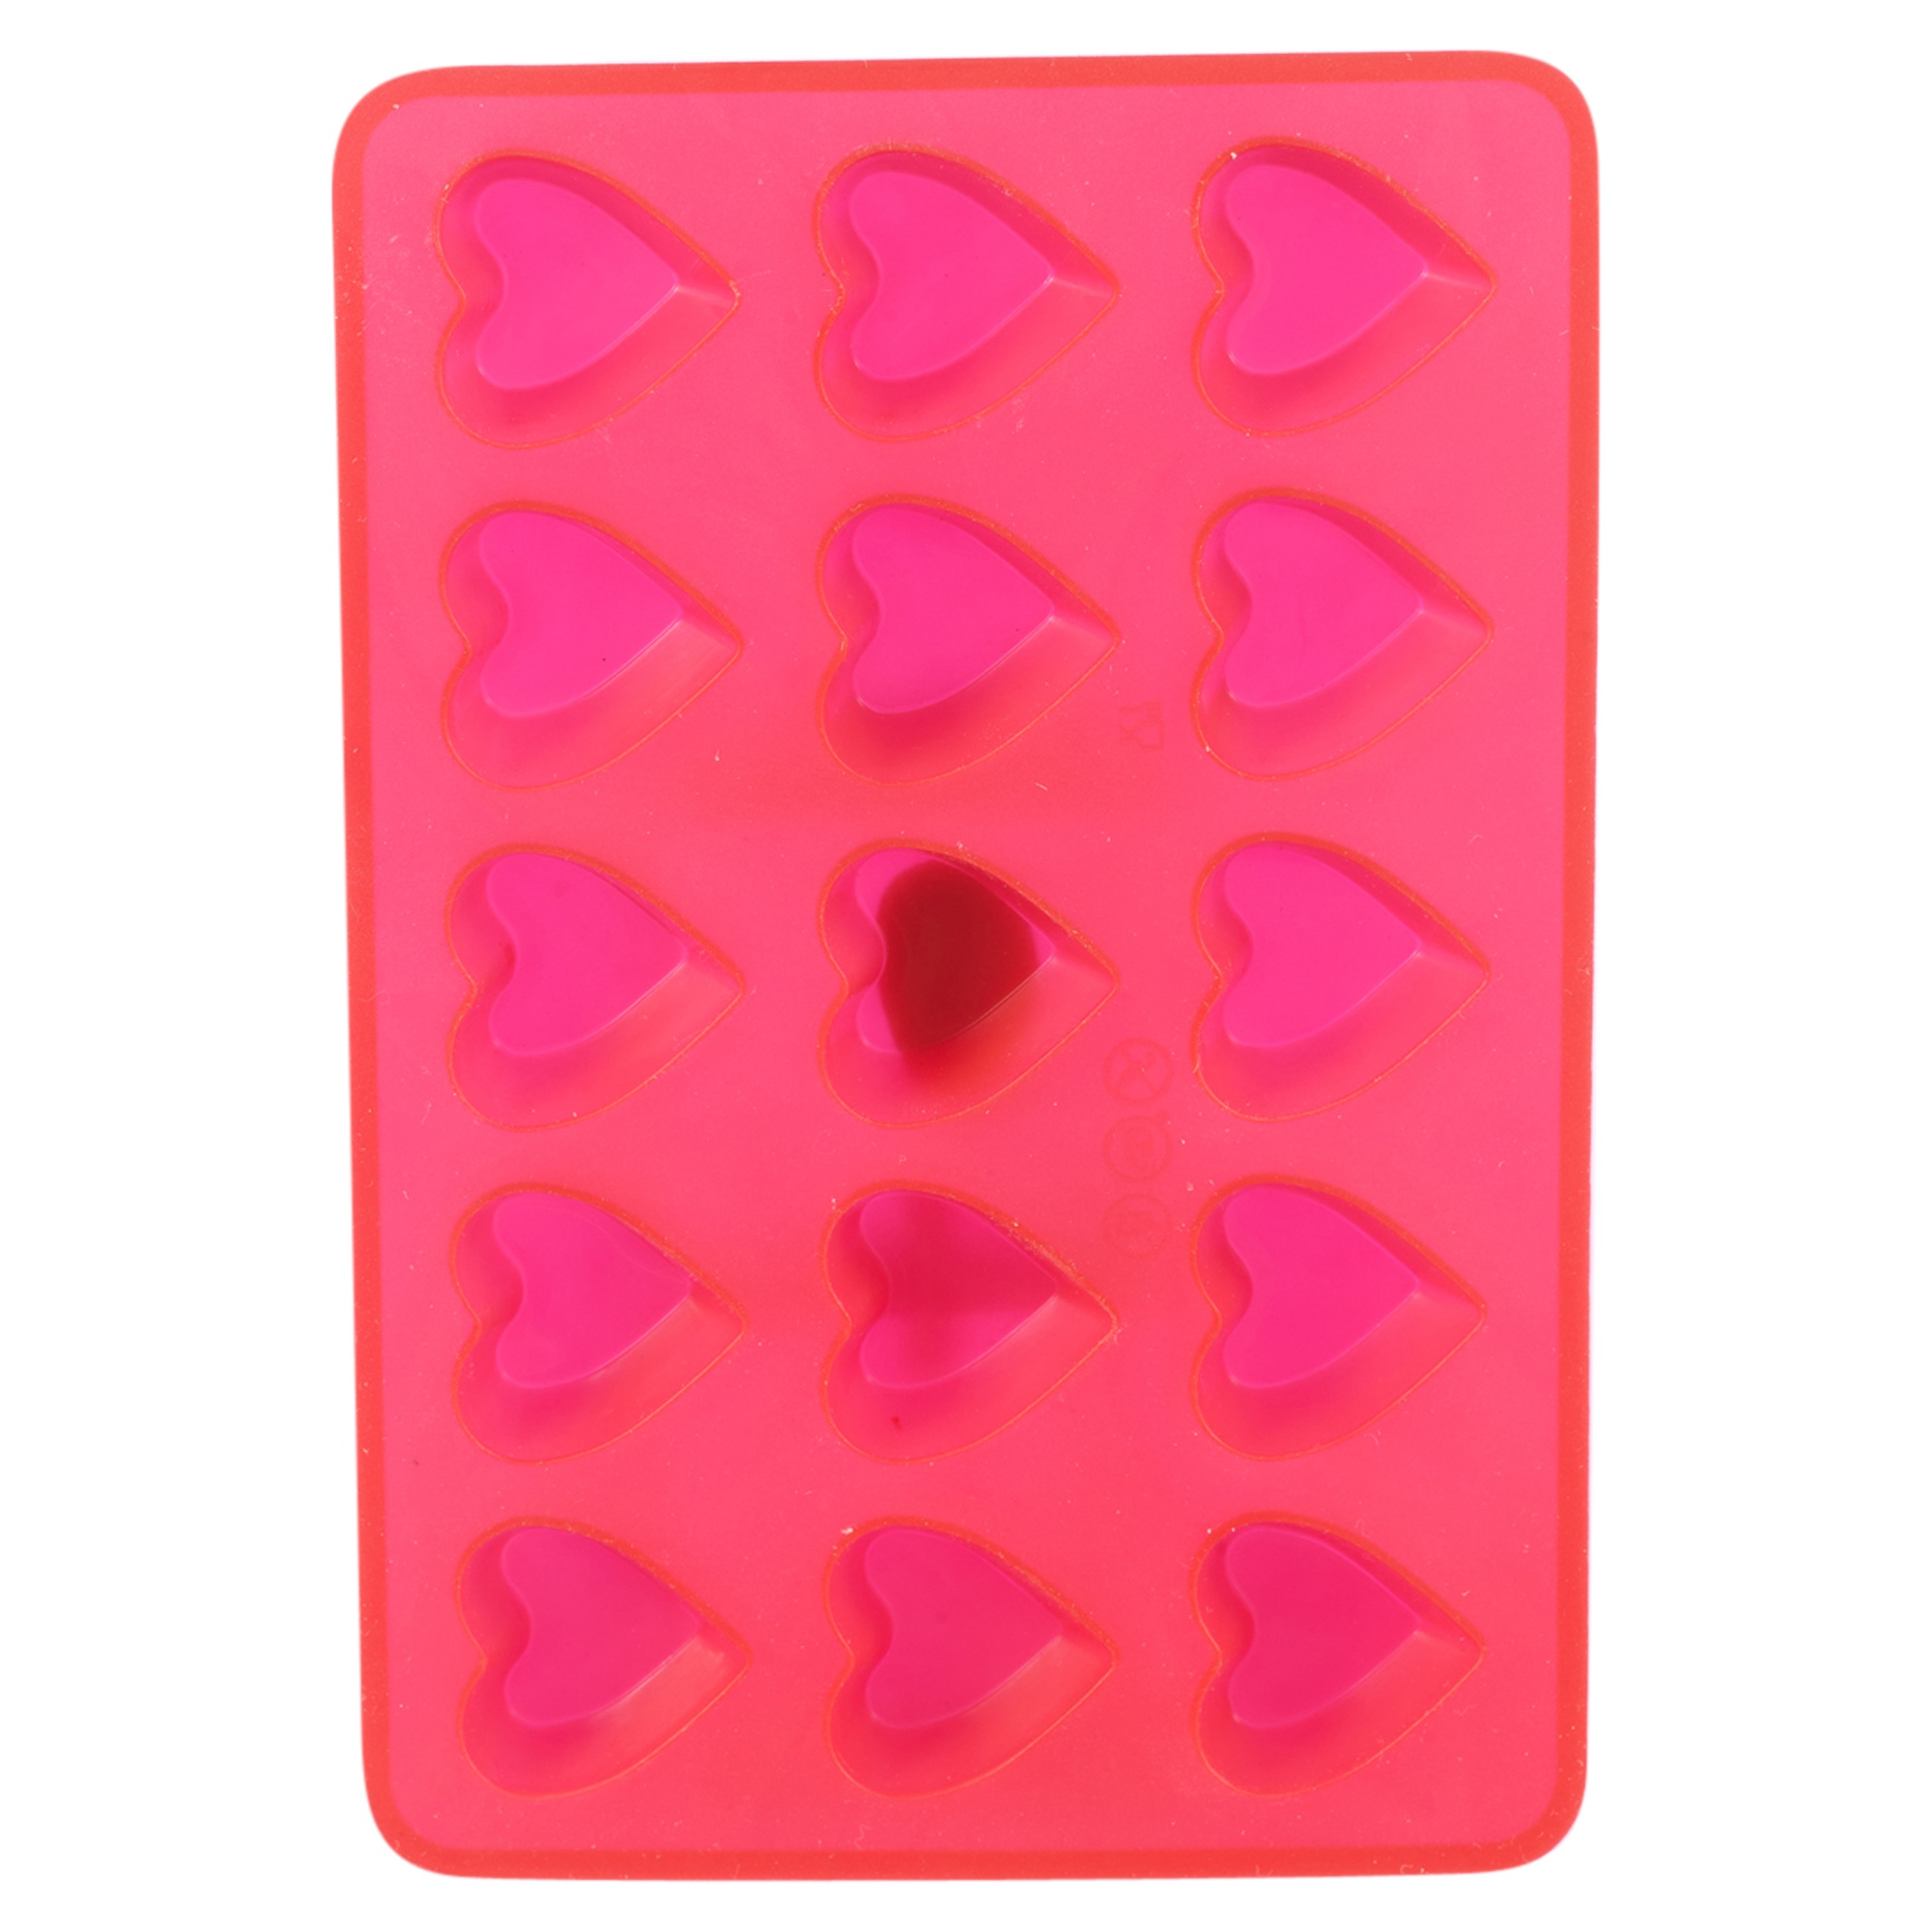 Silicone Chocolate Moulds Candy Cool Unique Shape maker Jelly Ice Cube ...